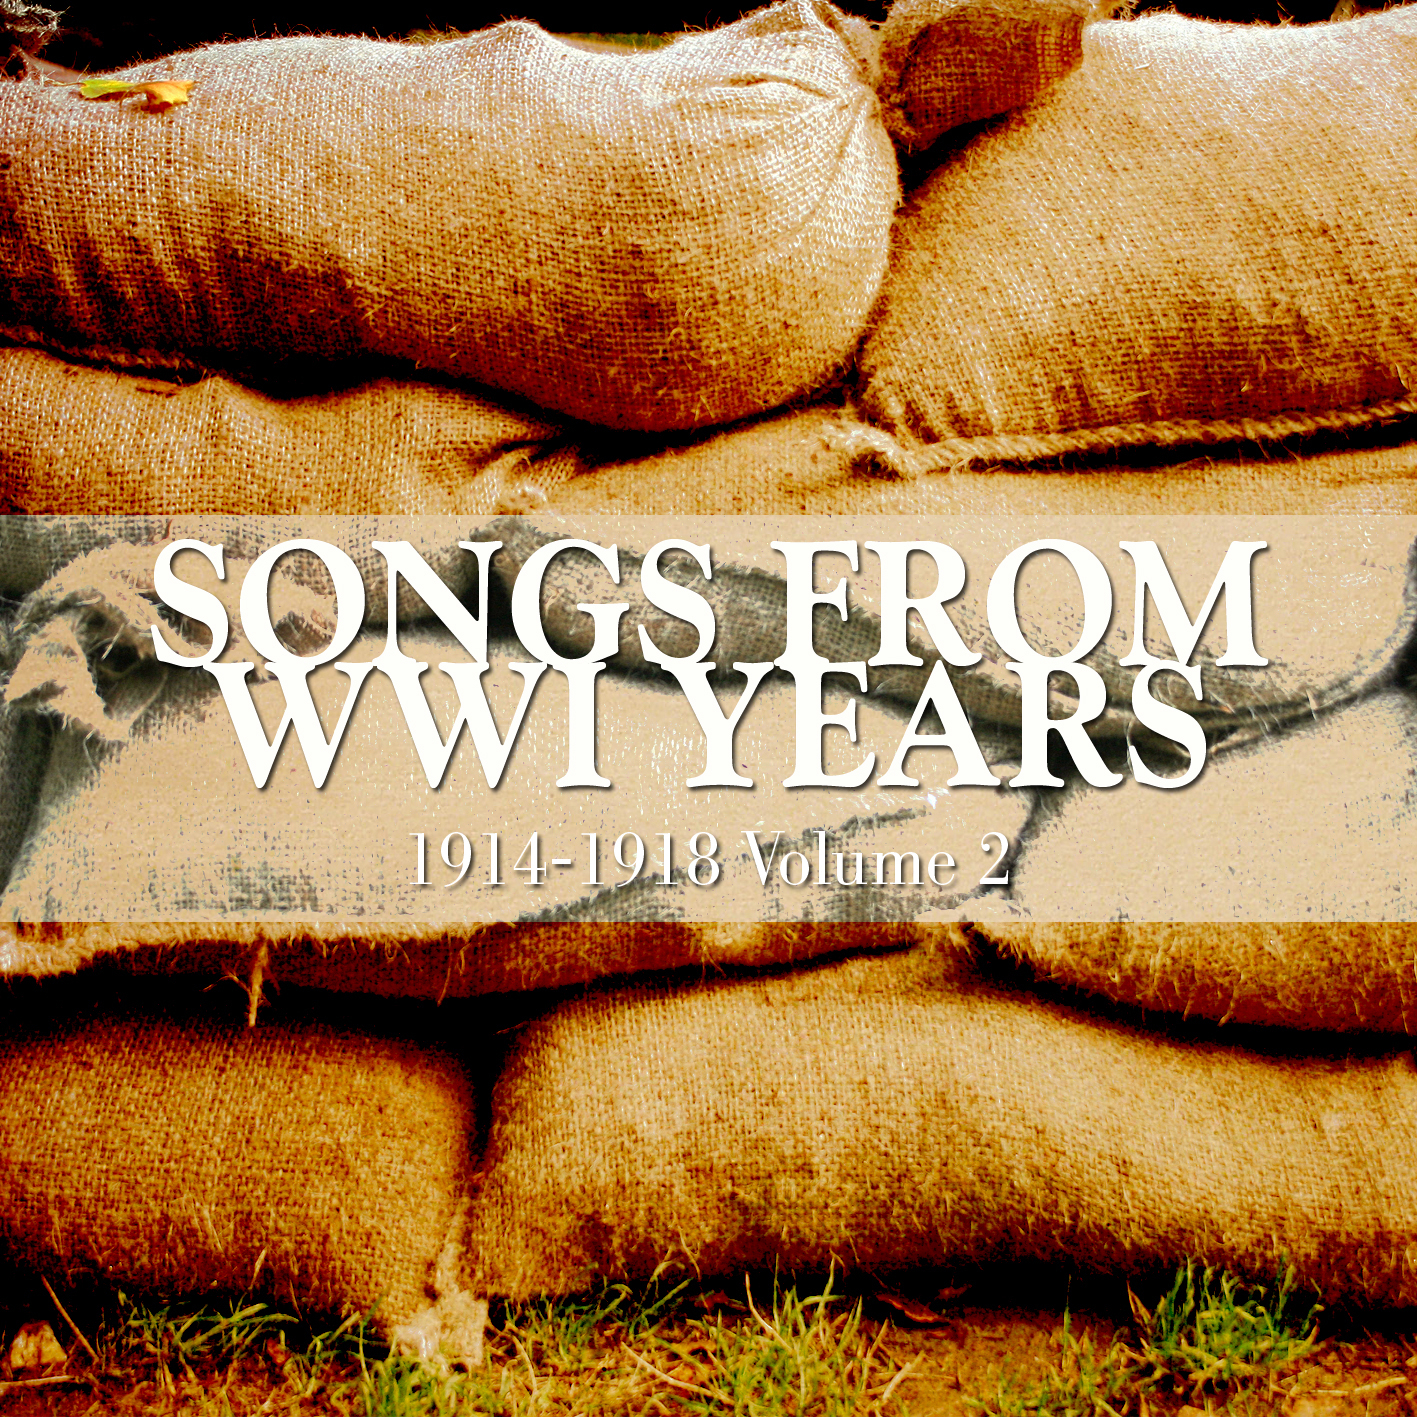 Timeless Songs From WWI Years 1914-1918 Volume 2